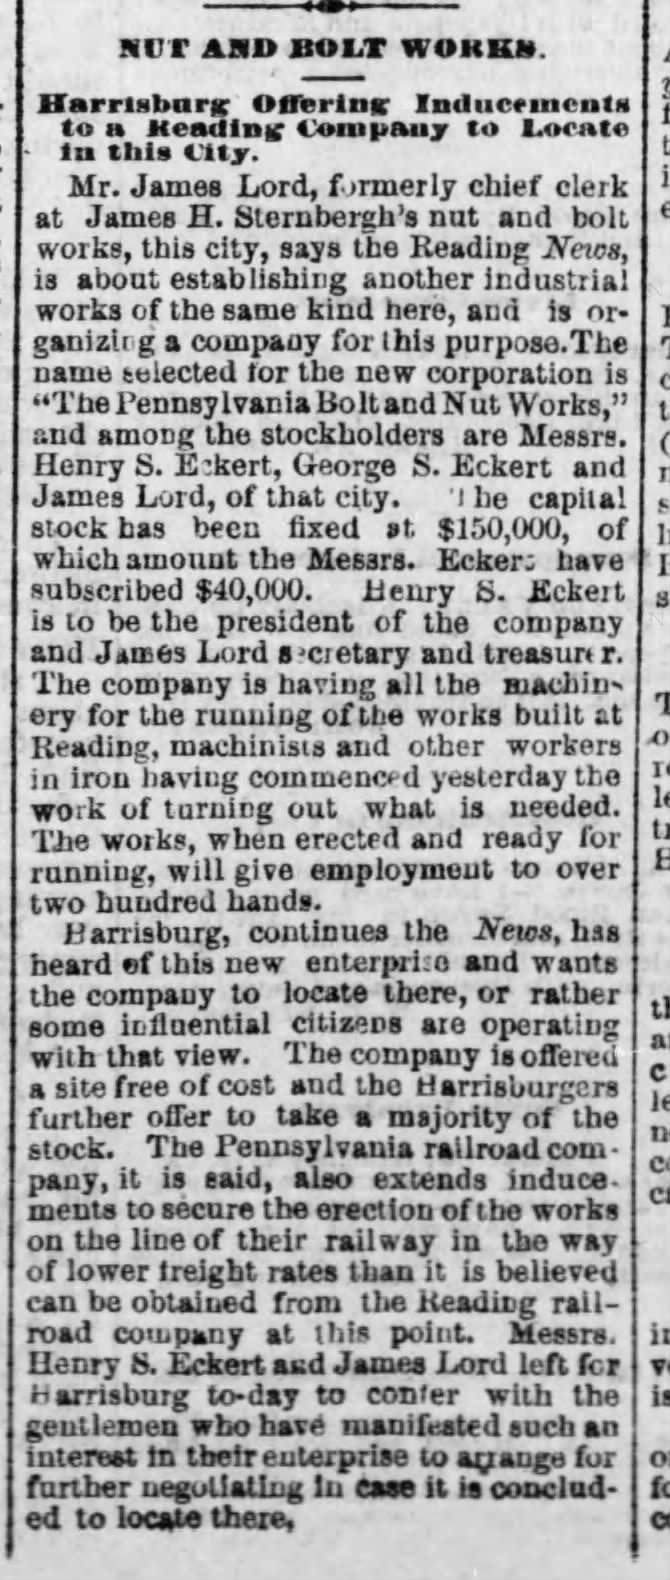 Harrisburg Daily Independent Feb 7 1882
Nut and Bolt Works